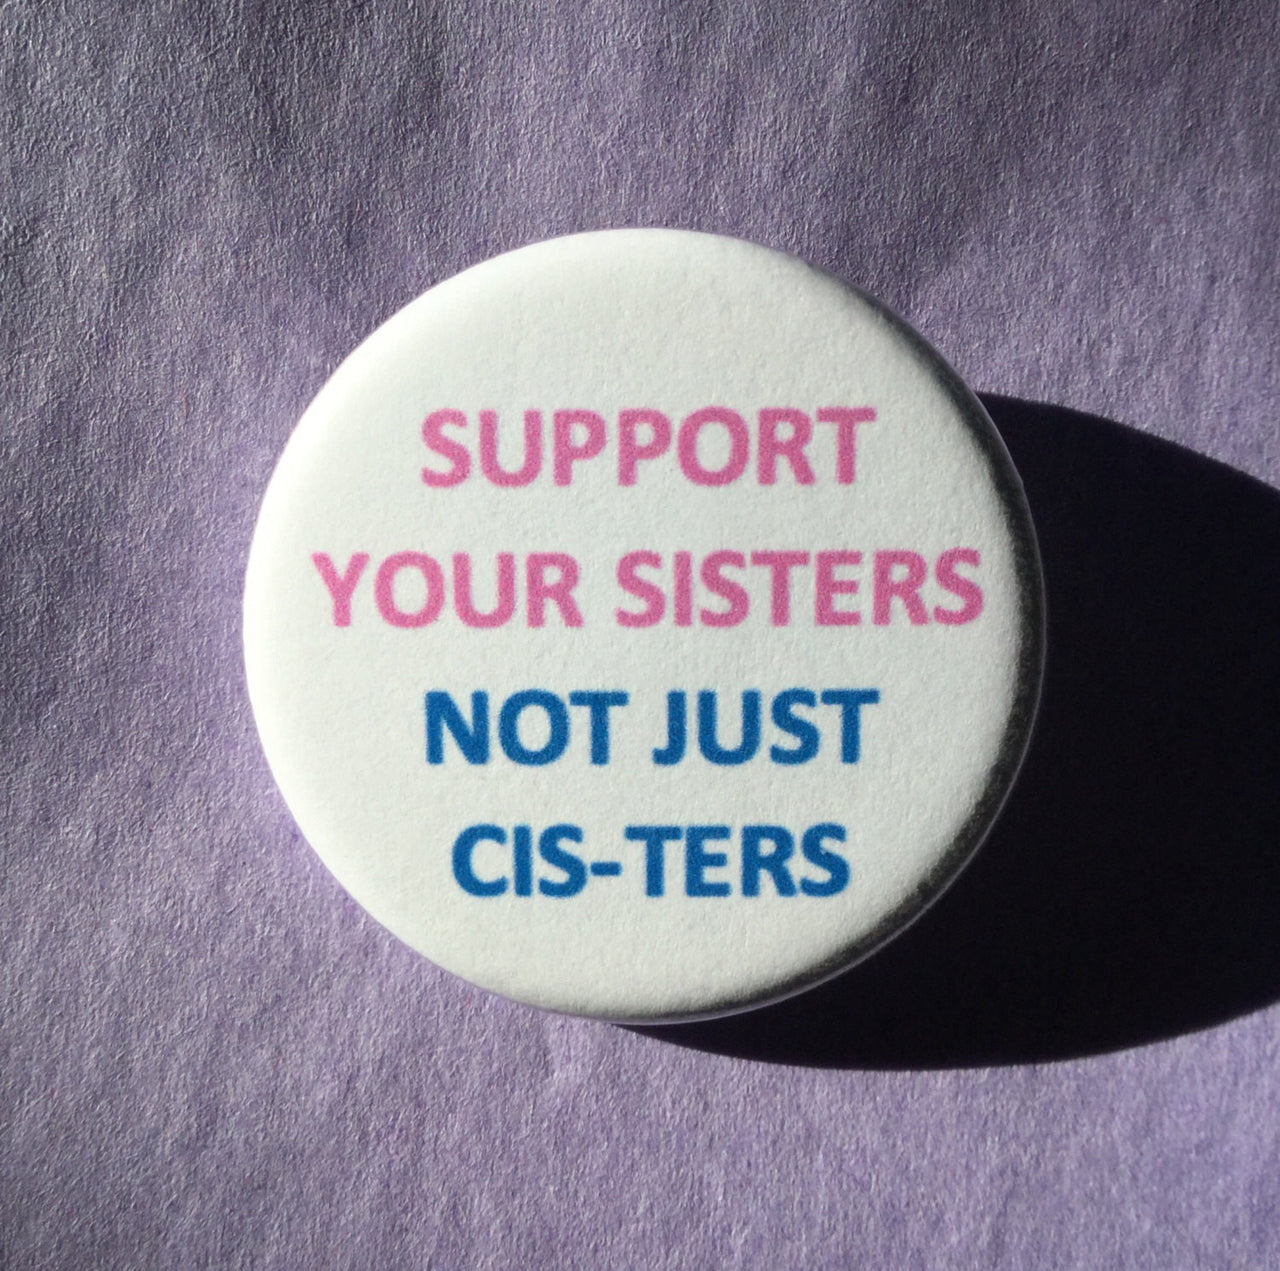 Support your sisters, not just cis-ters - Radical Buttons